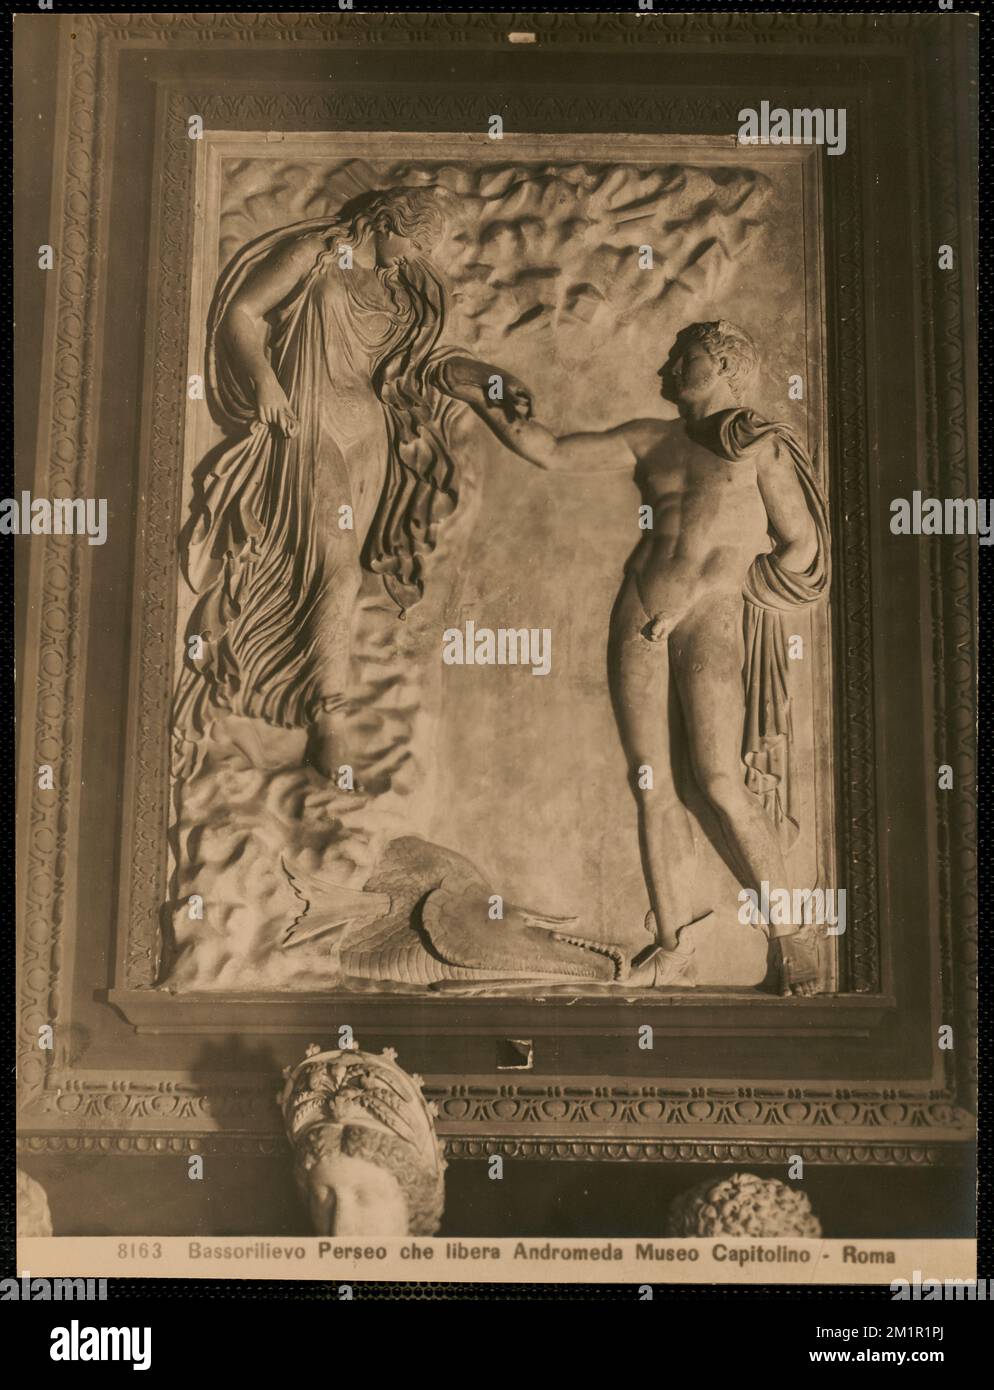 Bassorilievo Perseo che libera Andromeda, Museo Capitolino - Roma , Antiquities, Bas-reliefs, Heroes, Princesses, Andromeda, Princess, daughter of Cepheus, King of Ethiopia Mythological character, Perseus Greek mythological character. Nicholas Catsimpoolas Collection Stock Photo